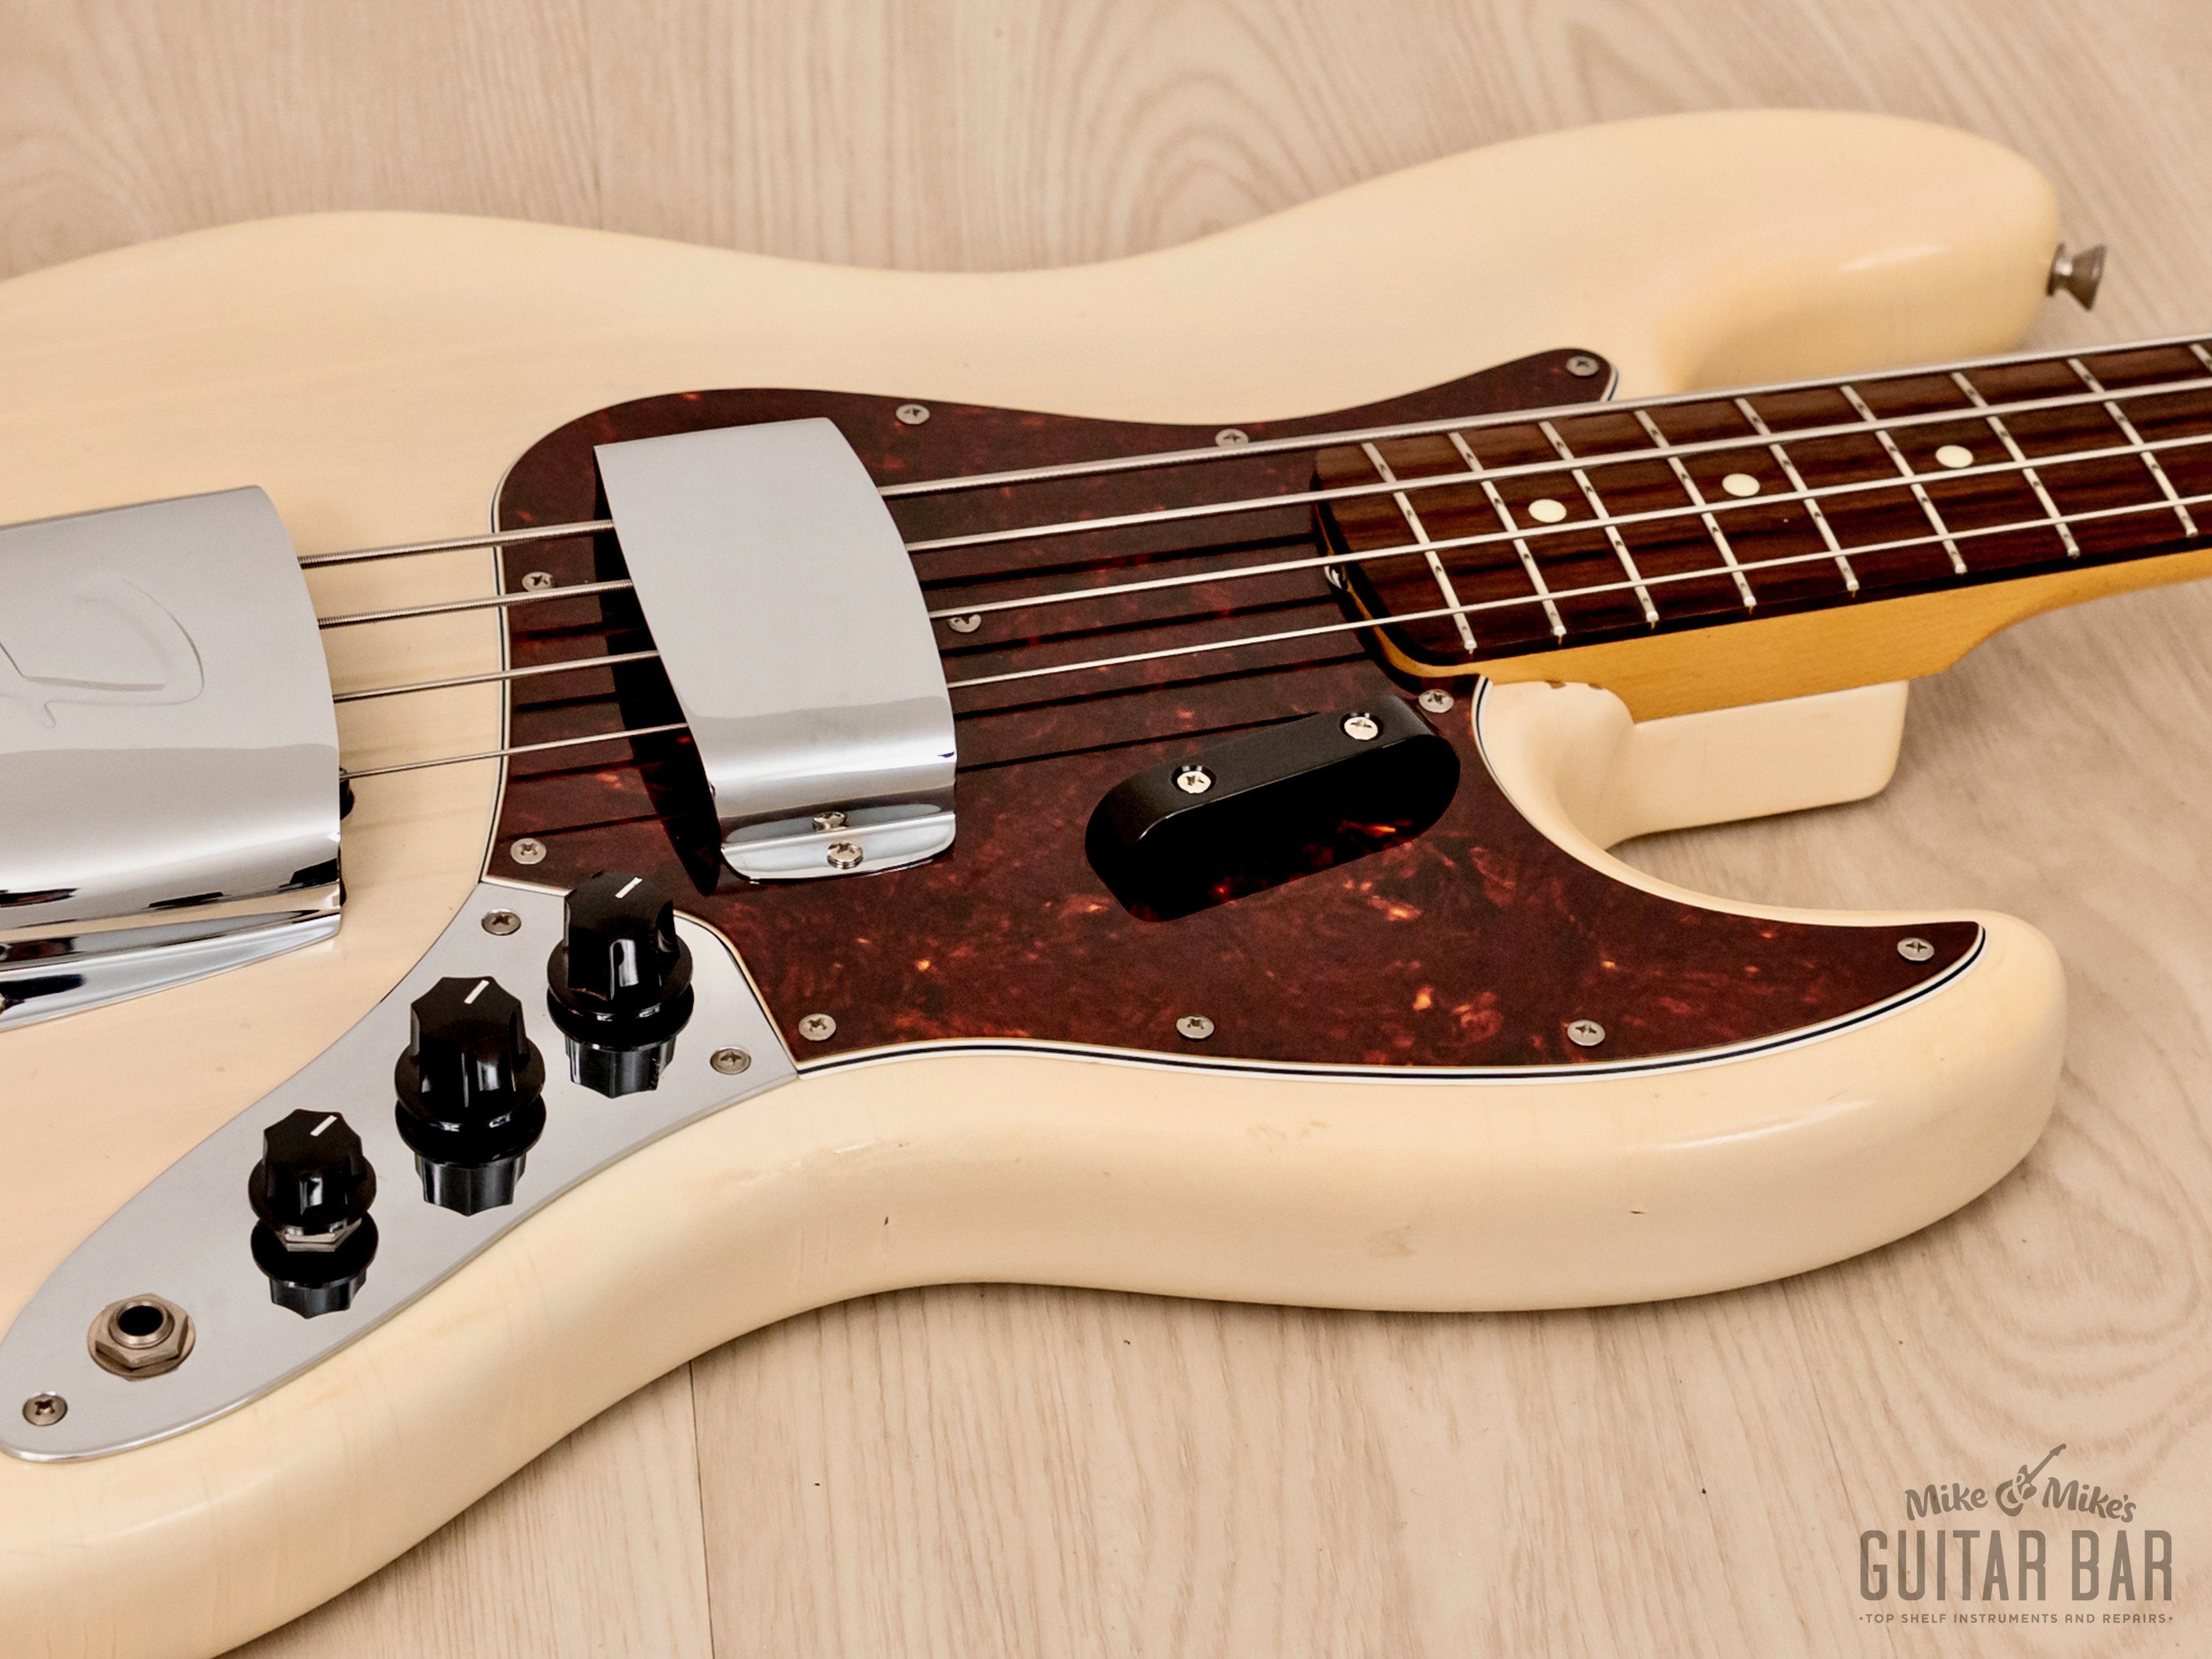 1989 Fender ExTrad '62 Jazz Bass JB62-128 Blonde Lacquer by Eric Daw w/ USA Pickups & Case, Japan MIJ